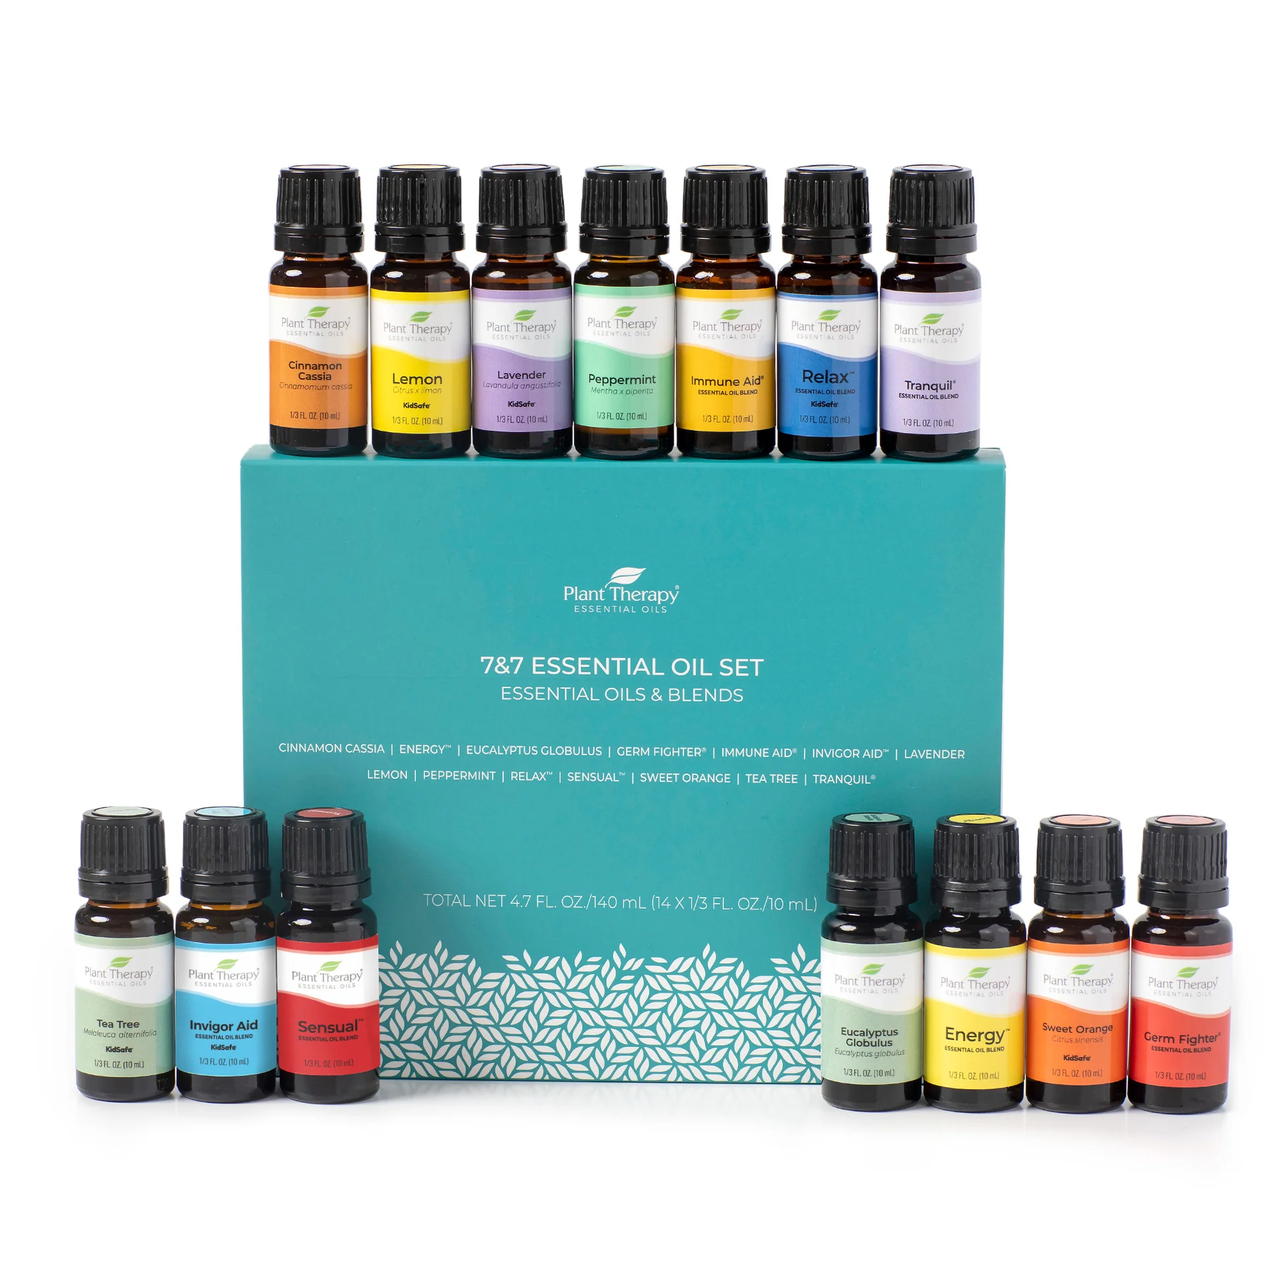 7 & 7 Essential Oil Set - Plant Therapy